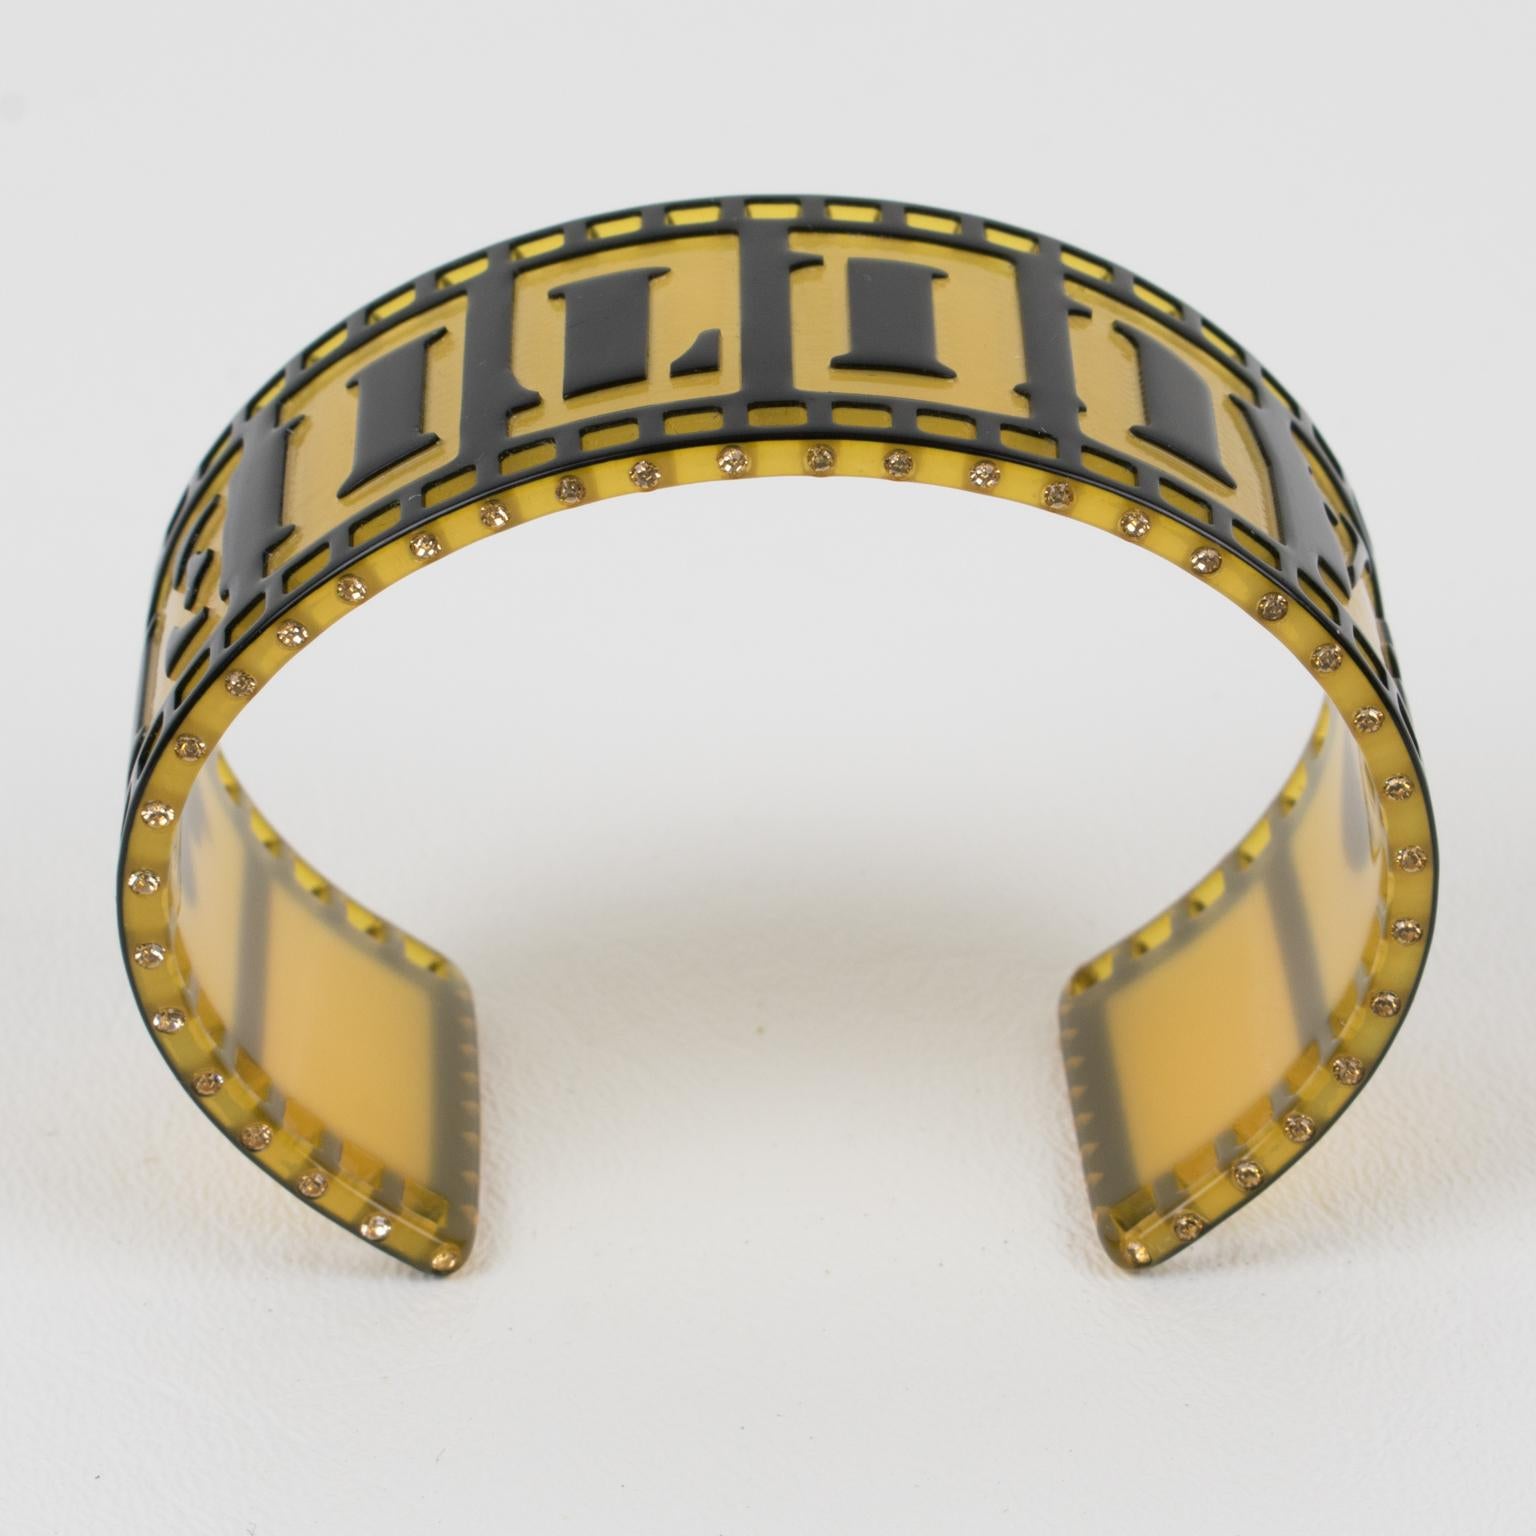 Jean Paul Gaultier Runway Black and Yellow Resin Cuff Bracelet Old Film Strip For Sale 3